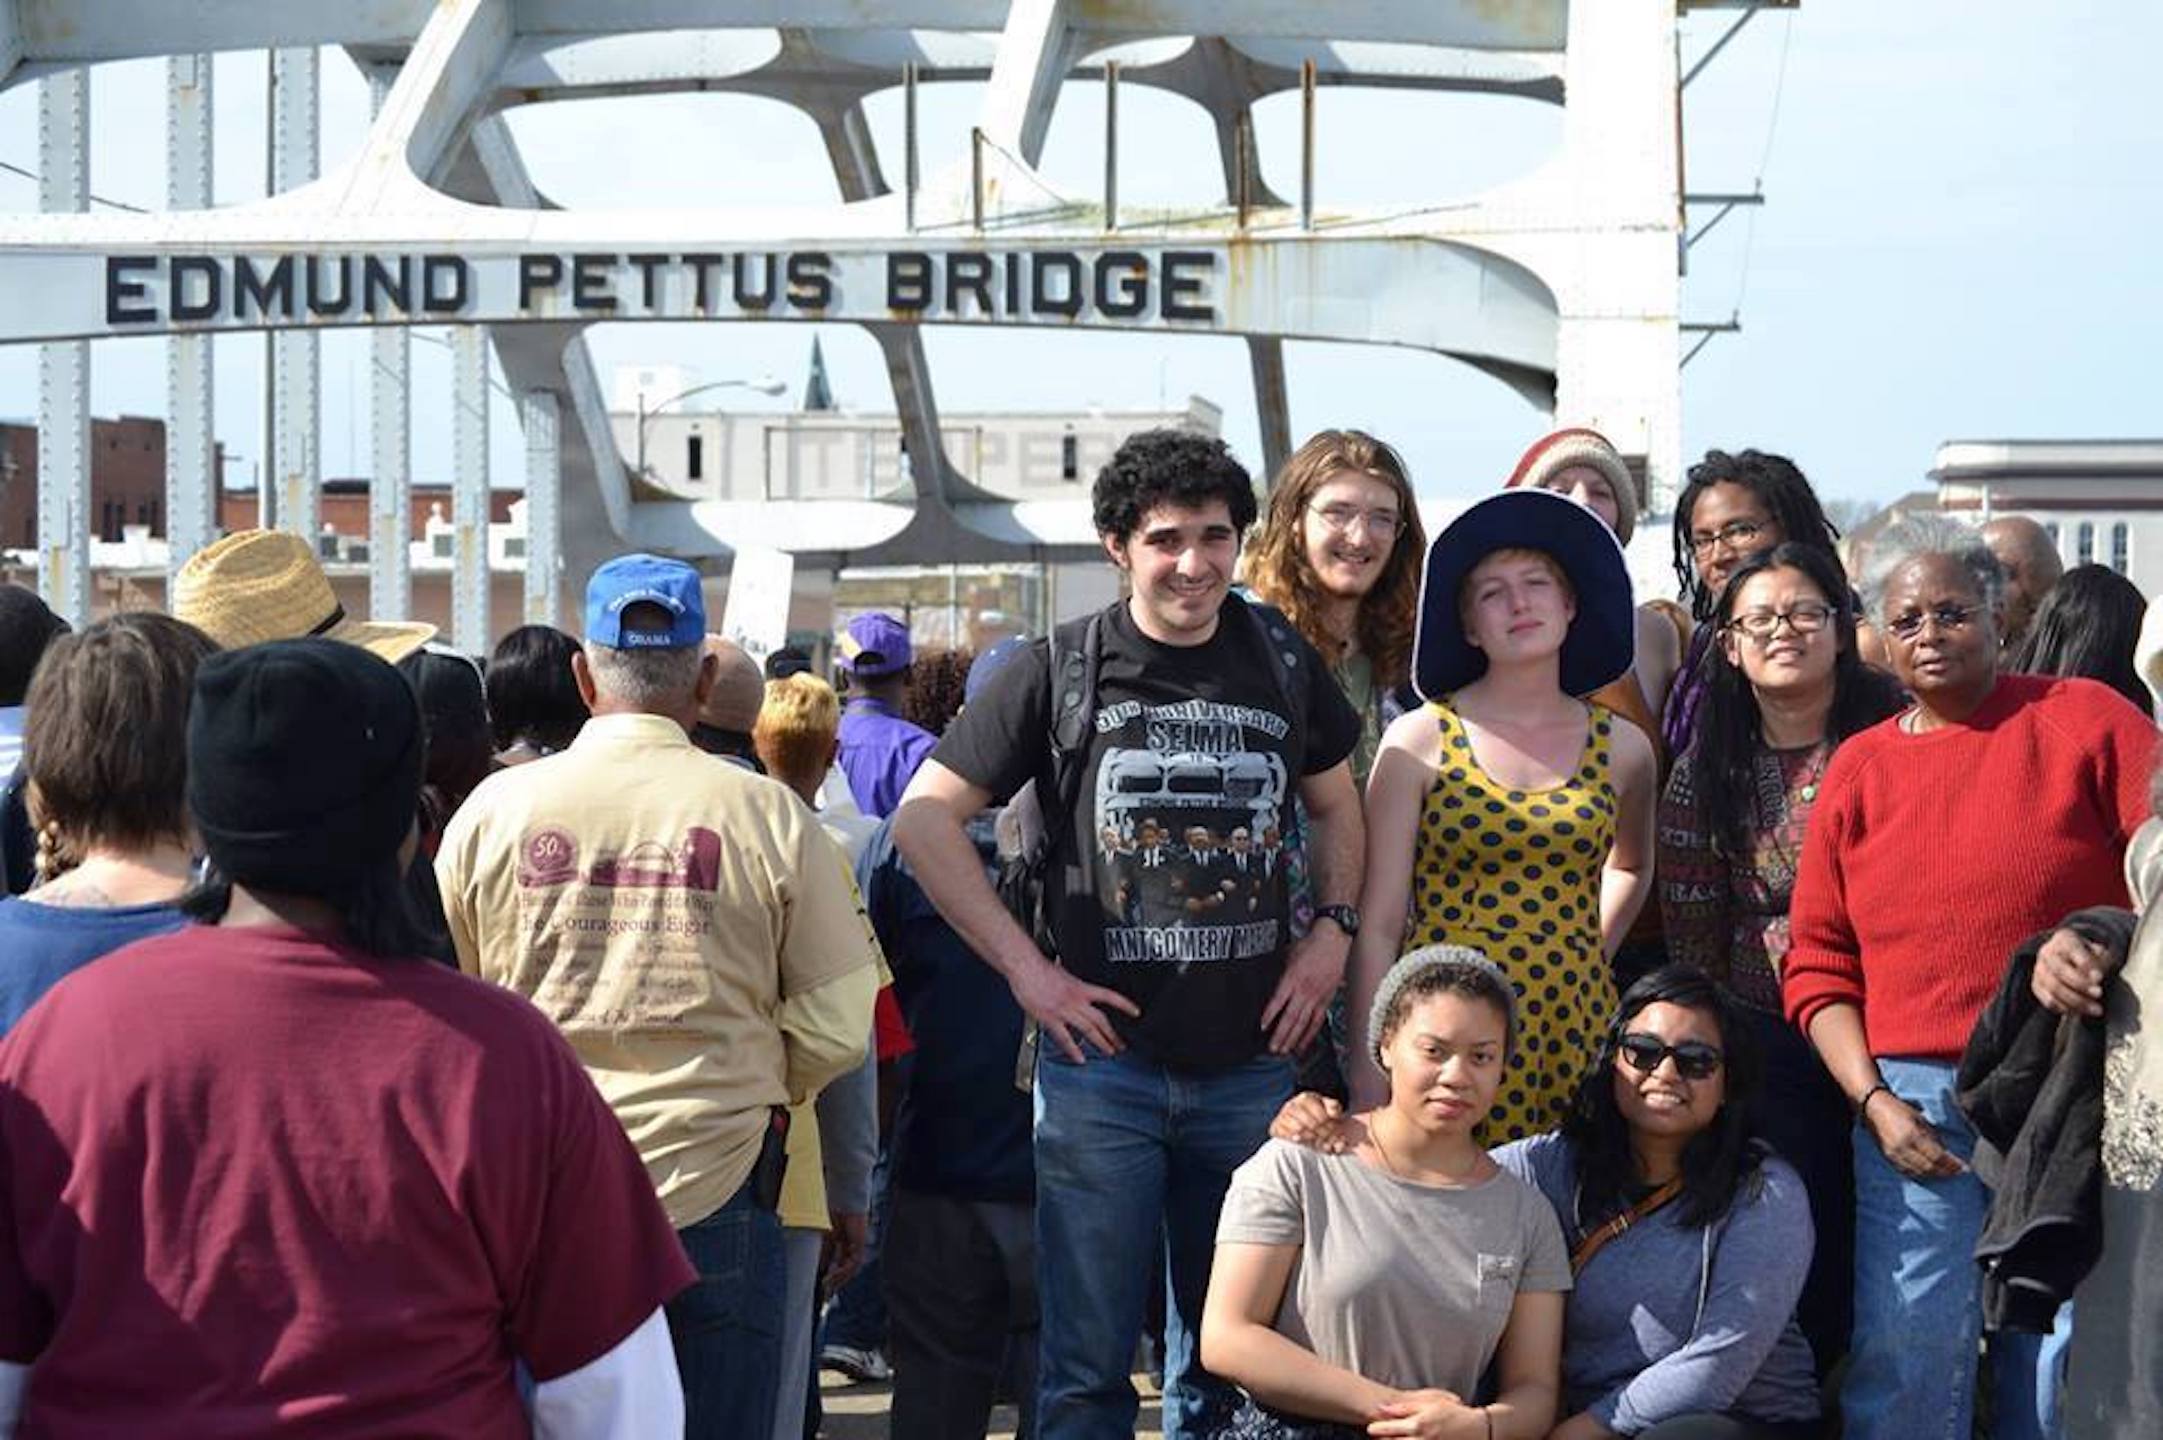 Mandy with students from Warren Wilson College, NC on the Edmund Pettus Bridge, March 2015. Mandy shares, “This marked the 50th Anniversary of the 1965 Selma-to-Montgomery Voting Right March. President Barack Obama and the First Family were in attendance with the late Representative John Lewis.” Photo courtesy of Mandy Carter.